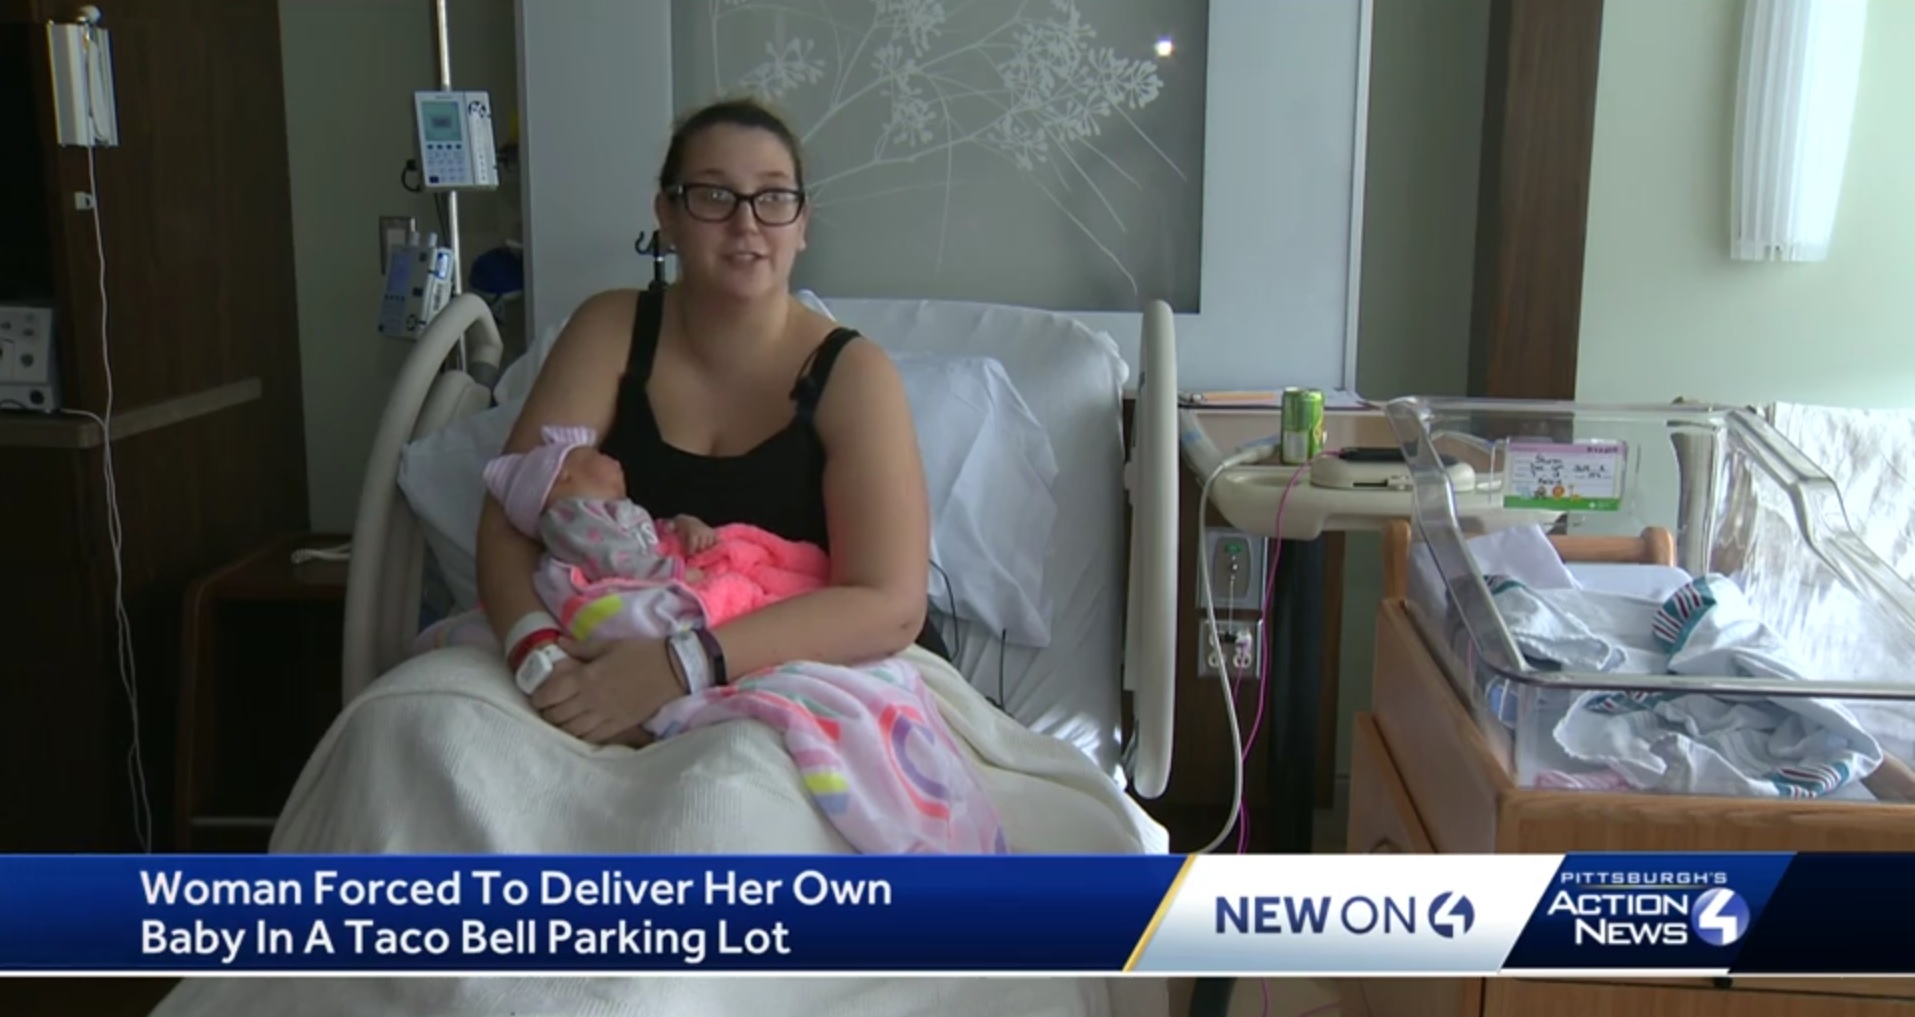 Woman Forced To Deliver Her Own Baby In Taco Bell Parking Lot